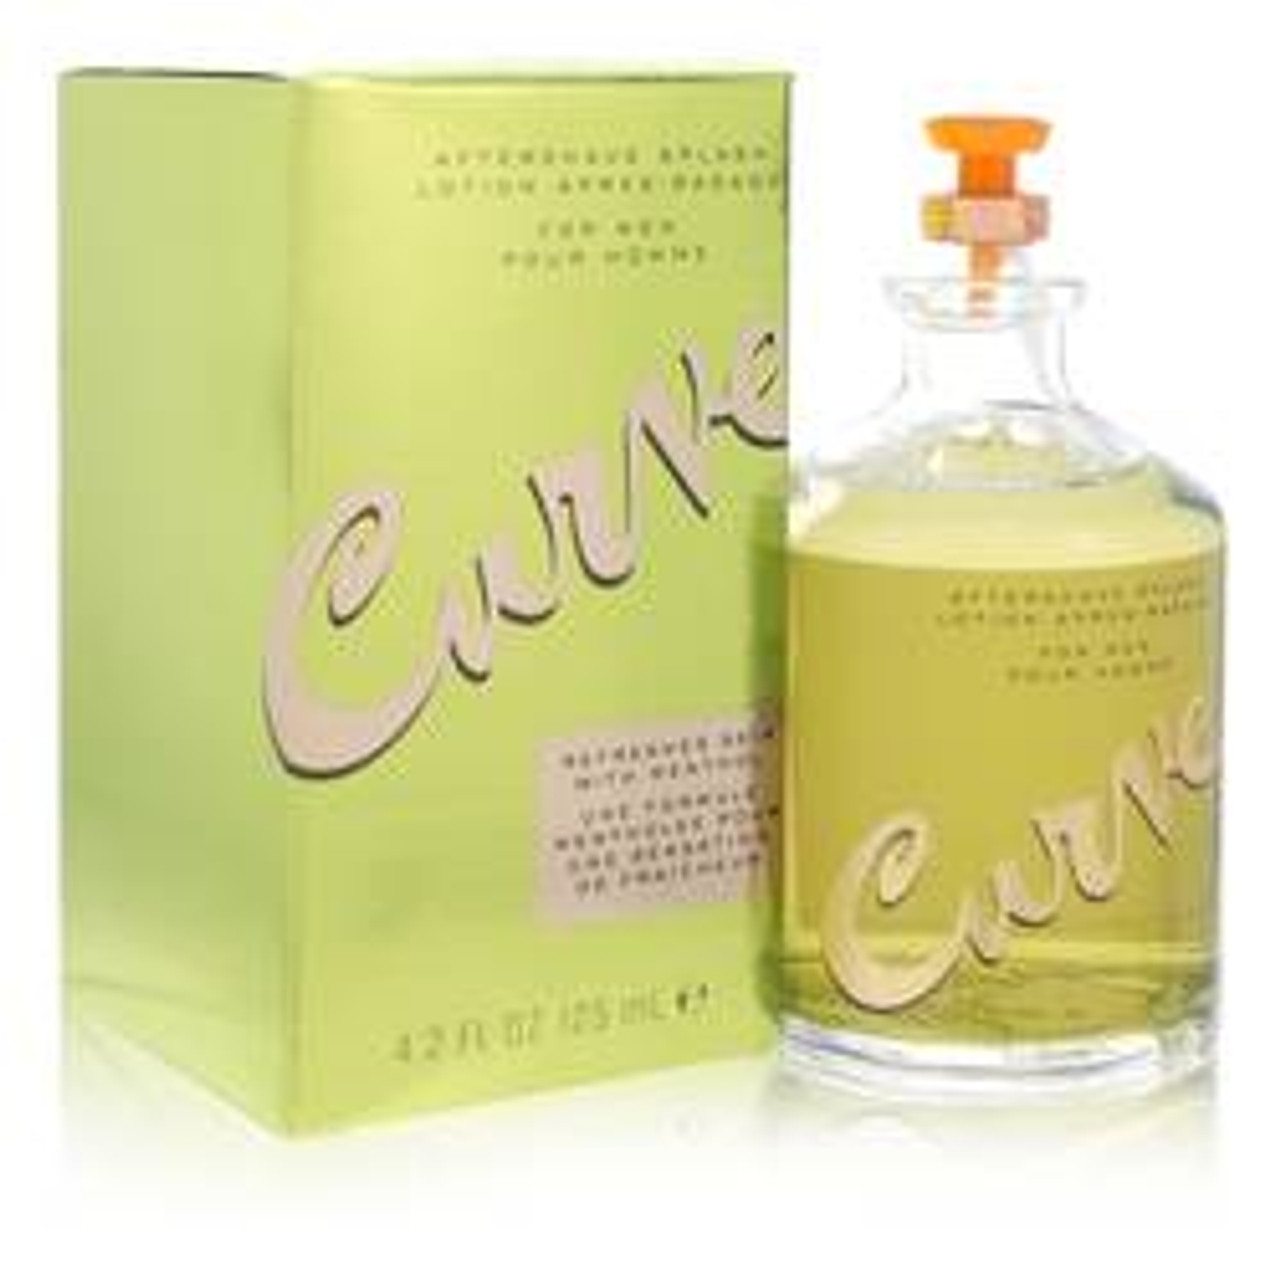 Curve Cologne By Liz Claiborne After Shave 4.2 oz for Men - [From 55.00 - Choose pk Qty ] - *Ships from Miami